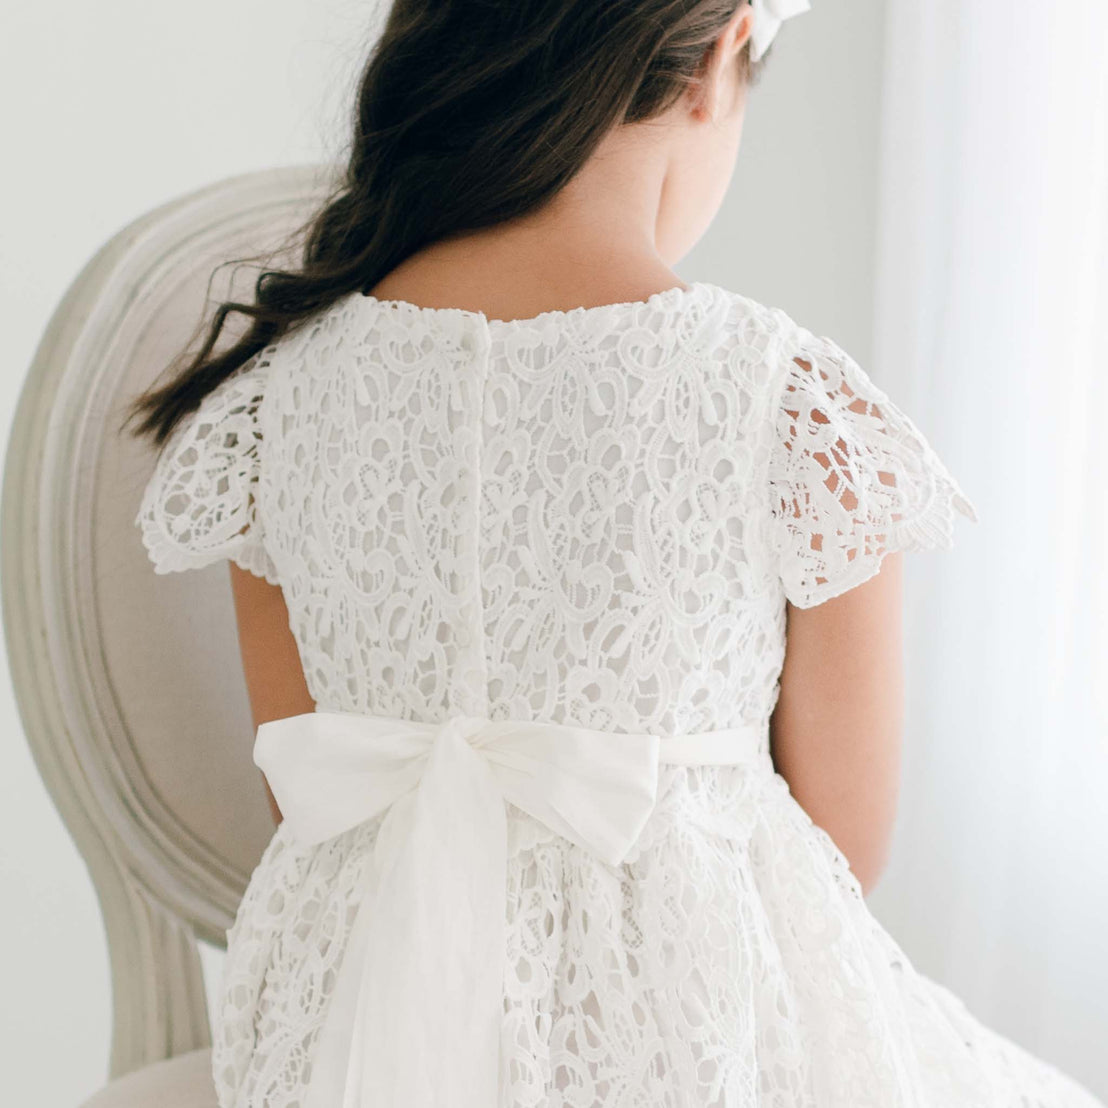 An adolescent girl wearing the Lola Girls Lace Dress. Made with cotton lining in light ivory and adorned with an all-over embroidered lace, plus a lace bodice, lacey cap sleeves, and buttons in back. Detail shows sash ties on the sides tied together.